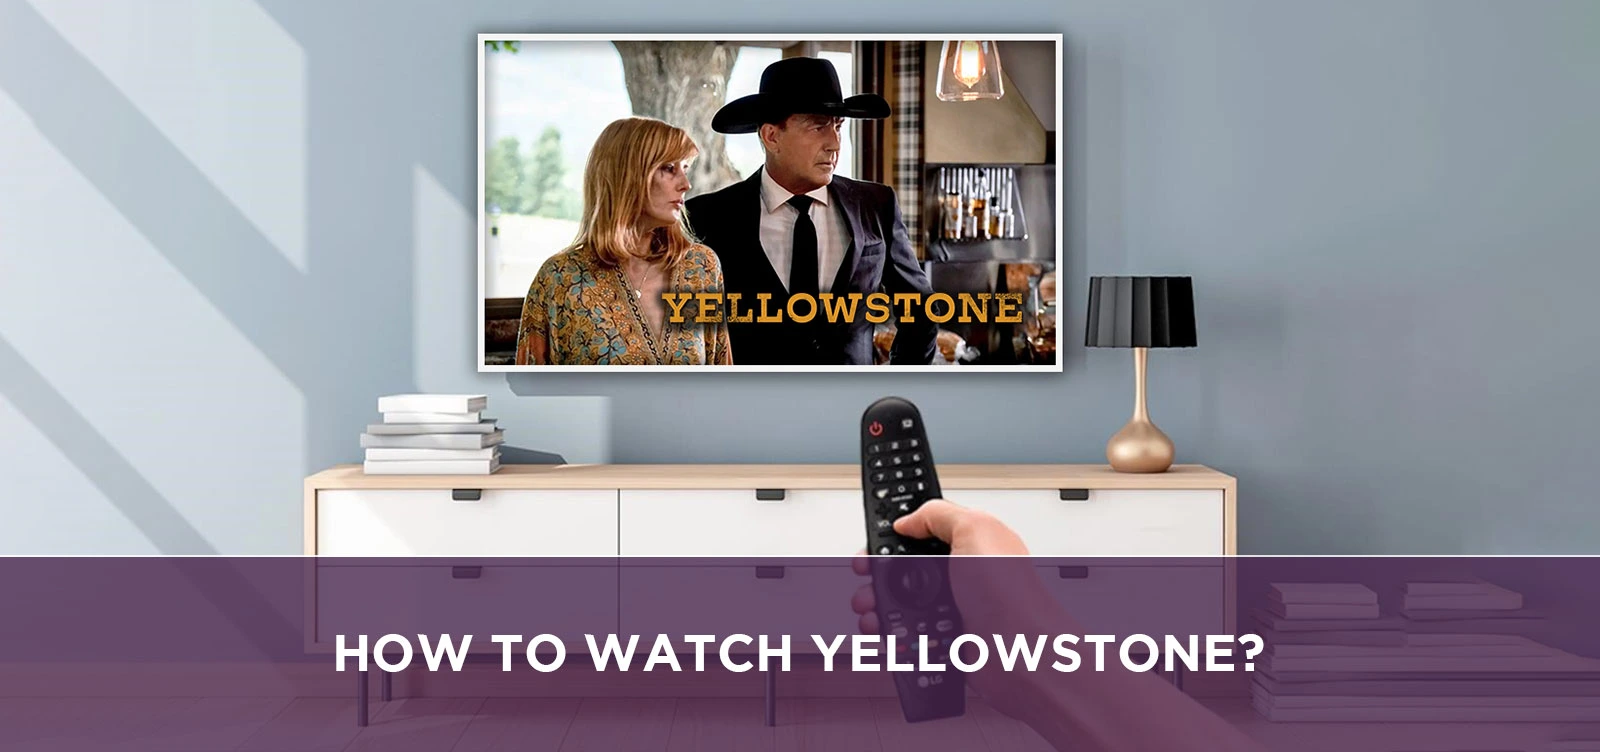 How to watch Yellowstone?